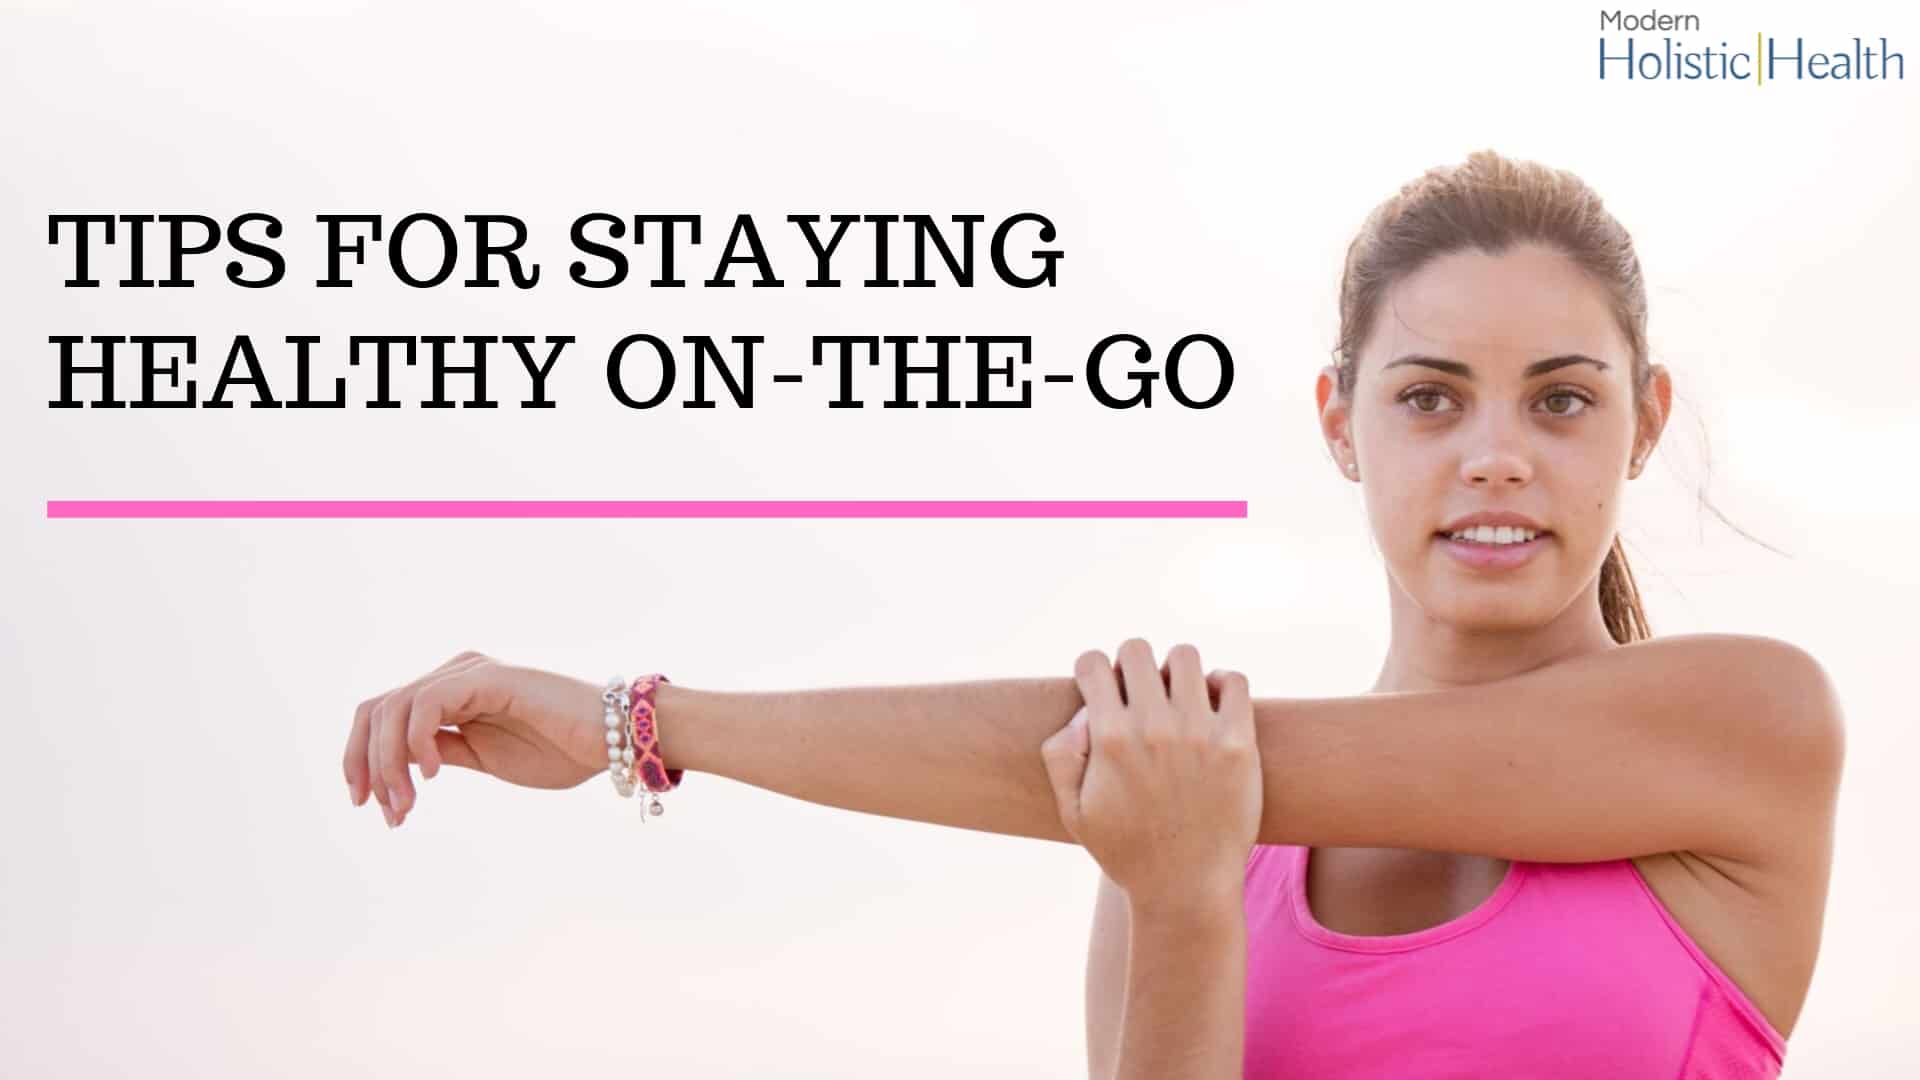 Tips For Staying Healthy On-The-Go